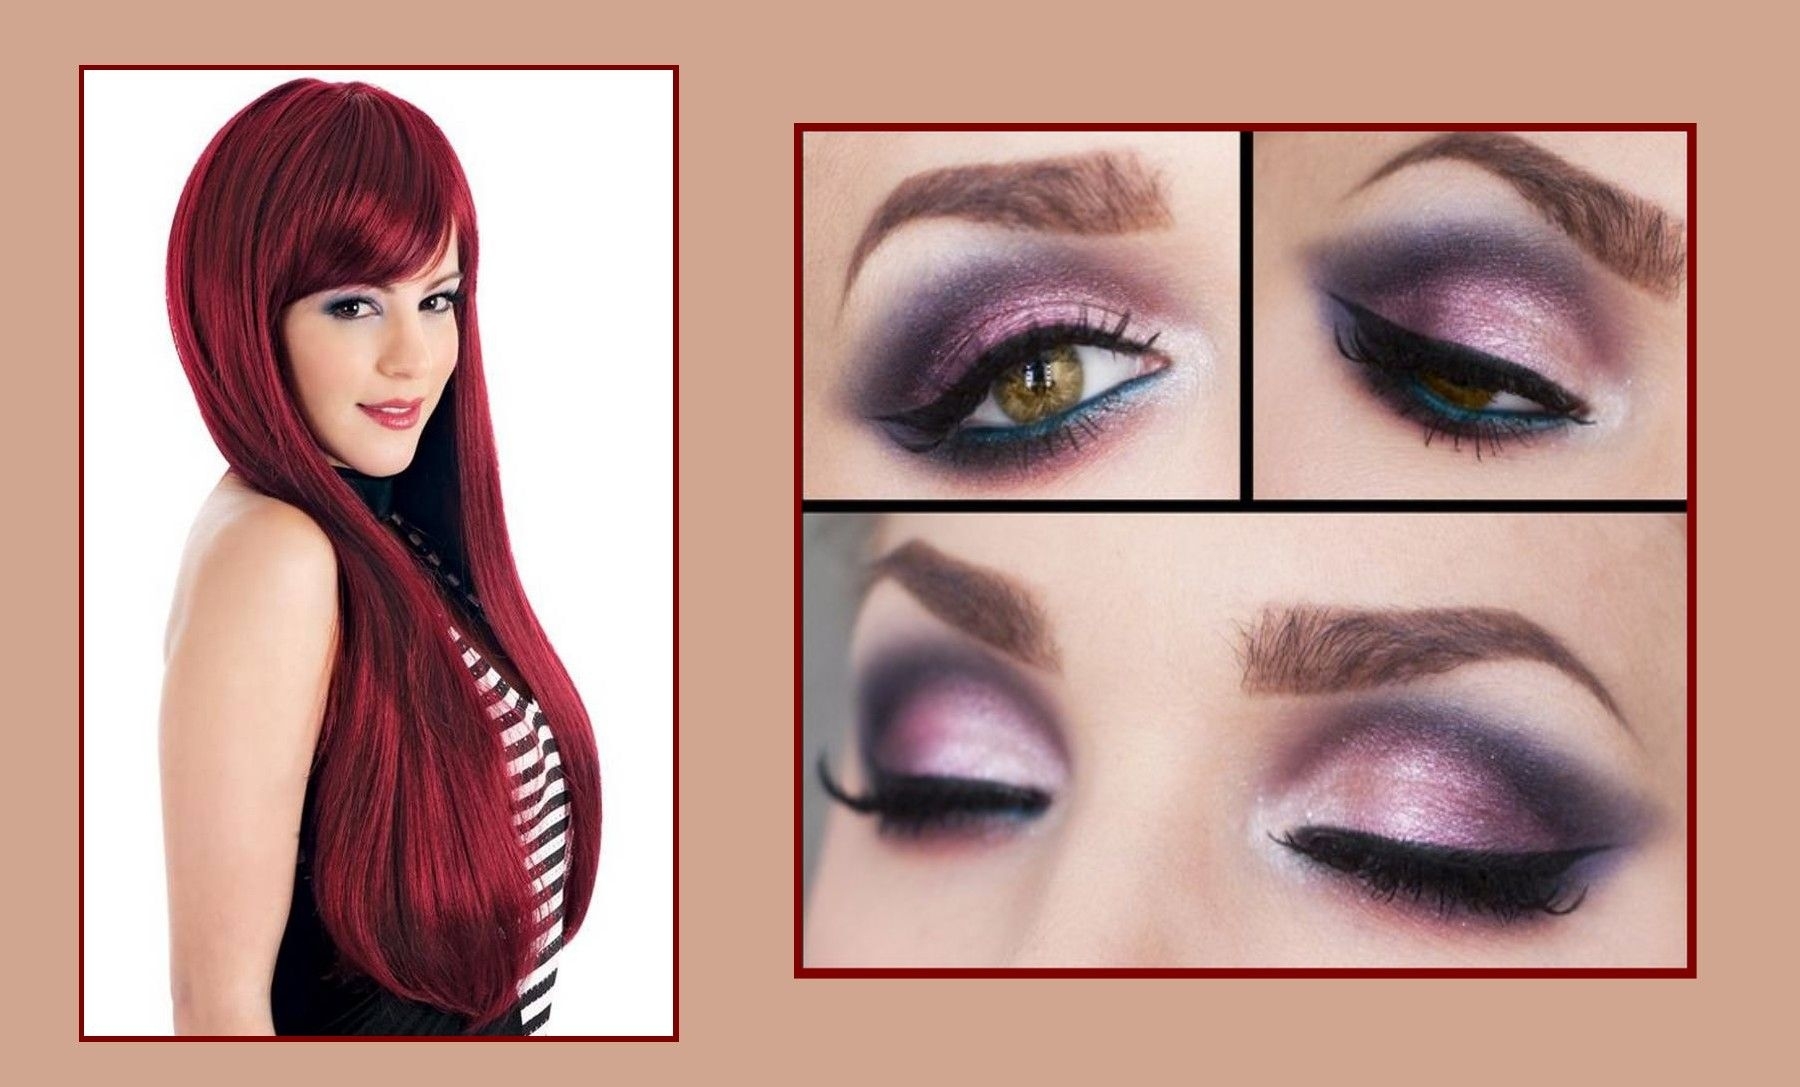 Makeup For Hazel Green Eyes | Makeup For Green Eyes And Red inside Eyeshadow Tips For Green Eyes And Red Hair